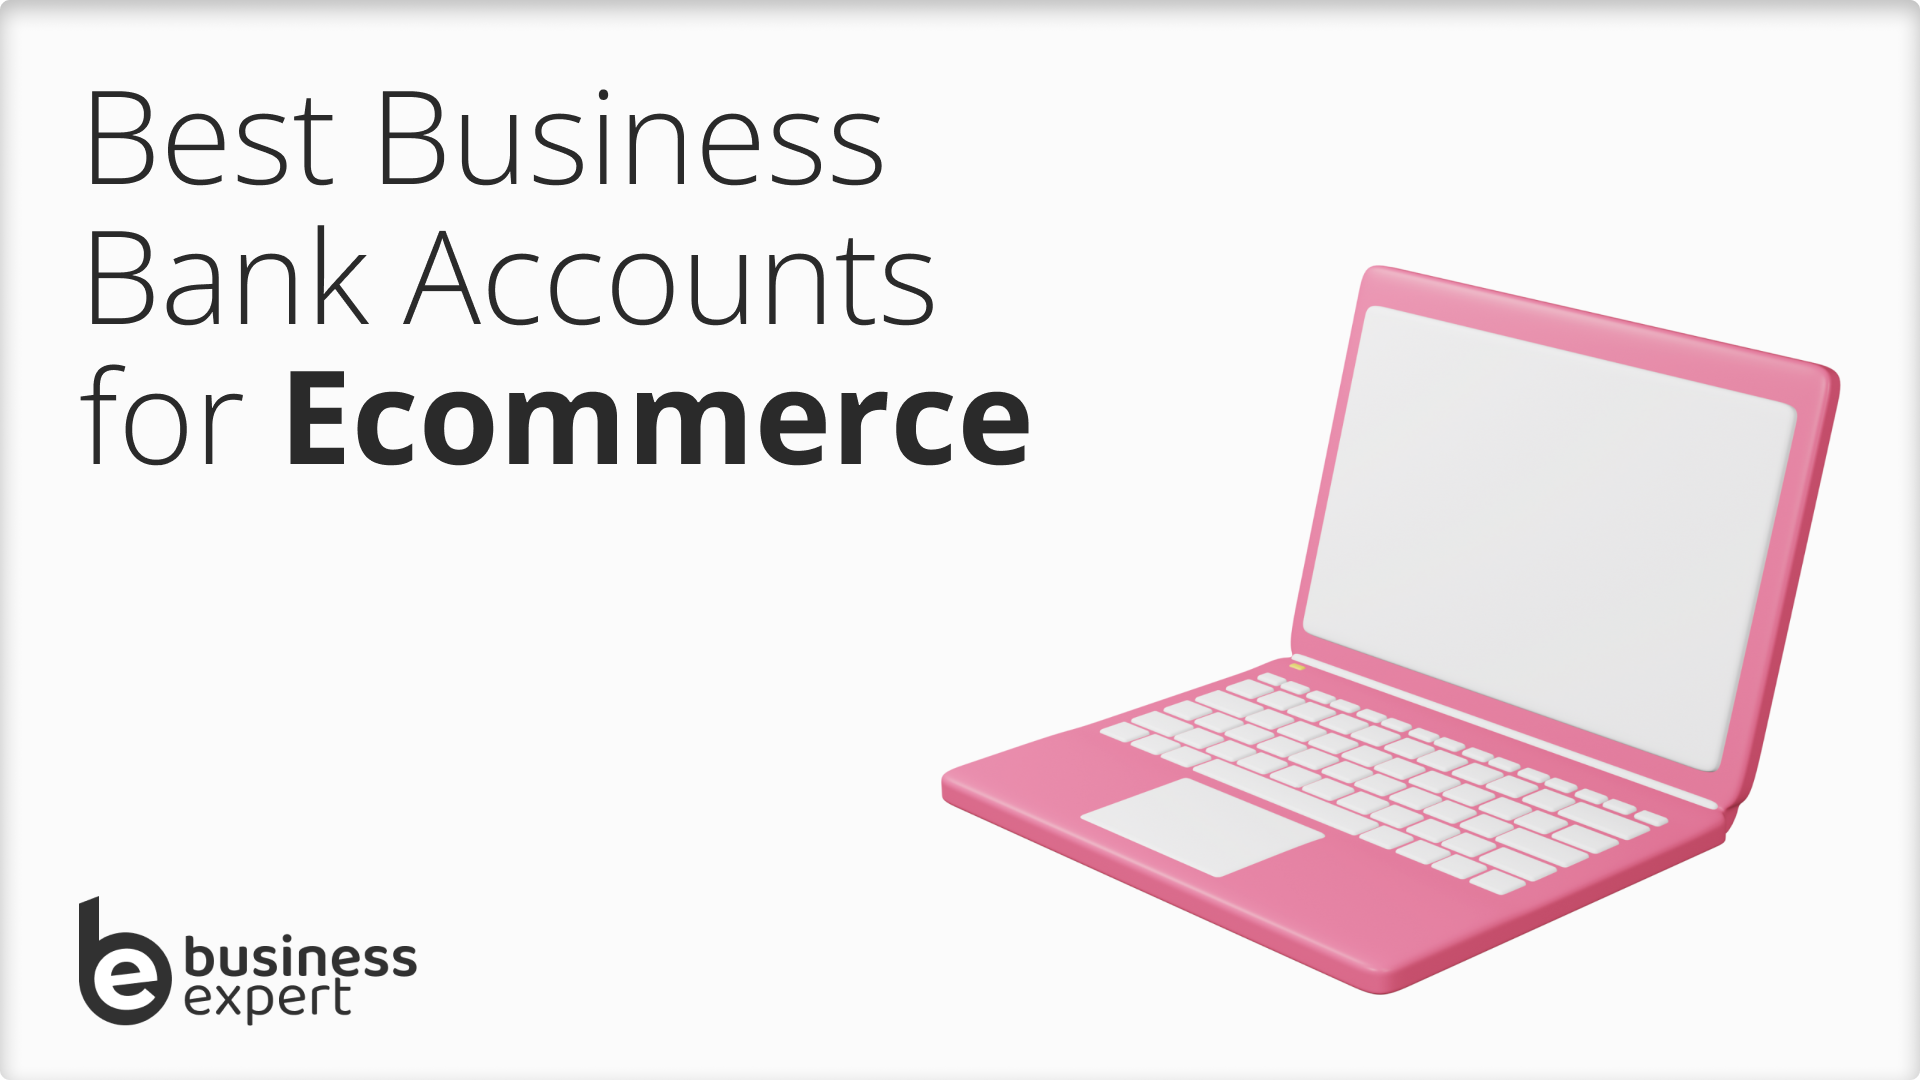 Compare Ecommerce Business Bank Accounts